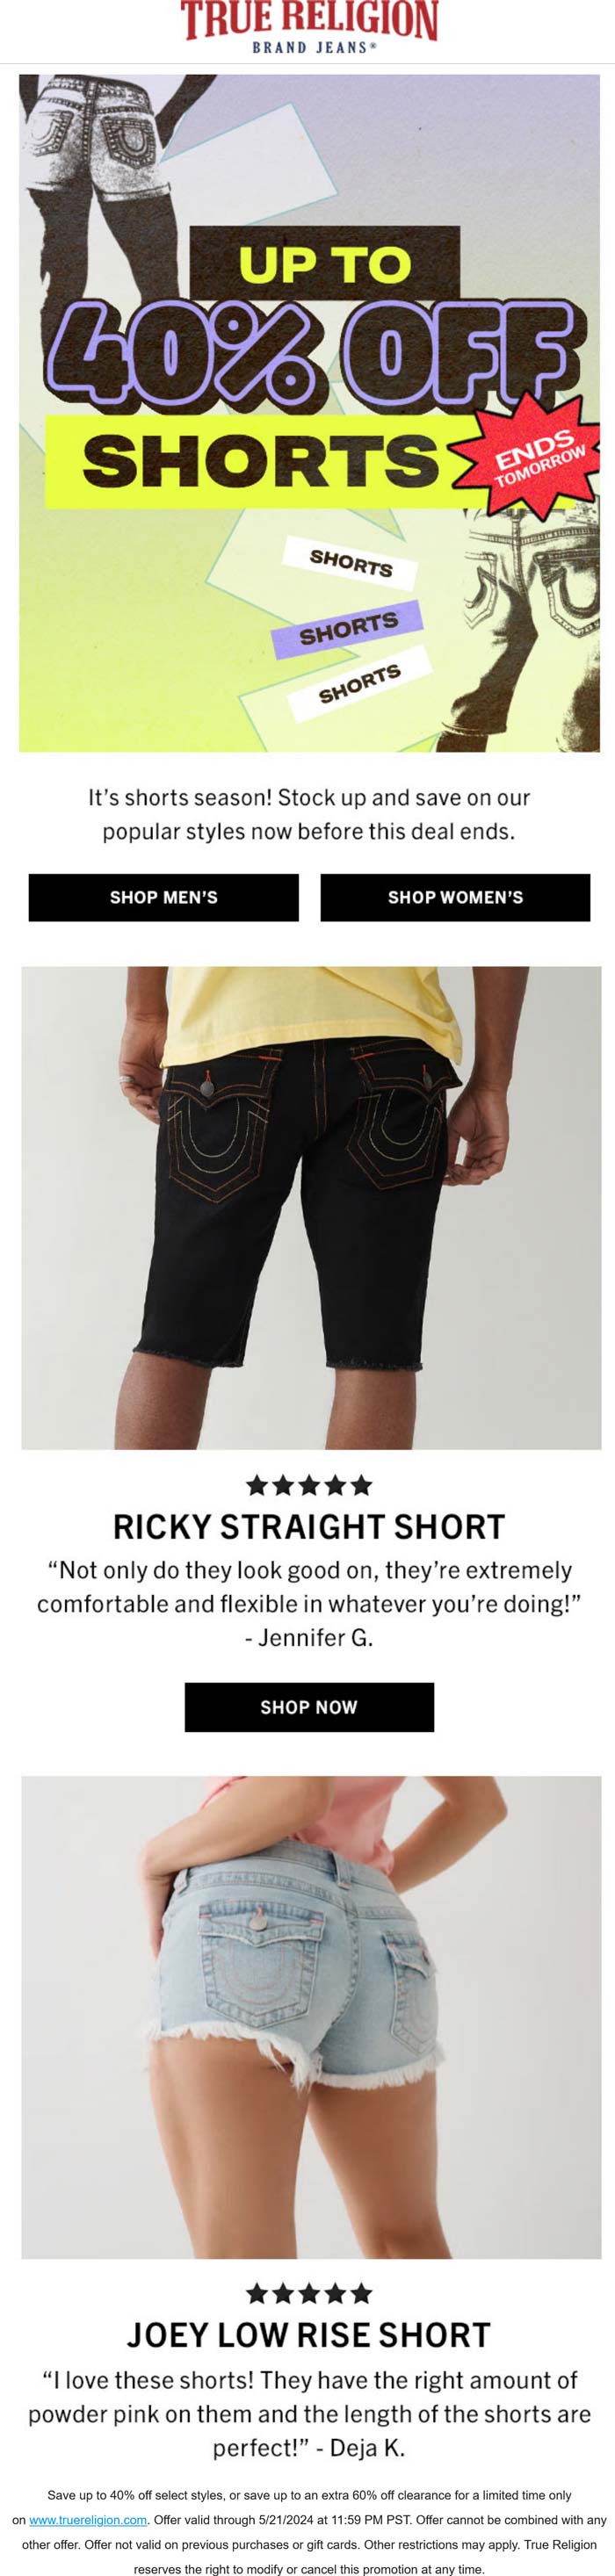 True Religion stores Coupon  40% off shorts & more at True Religion #truereligion 